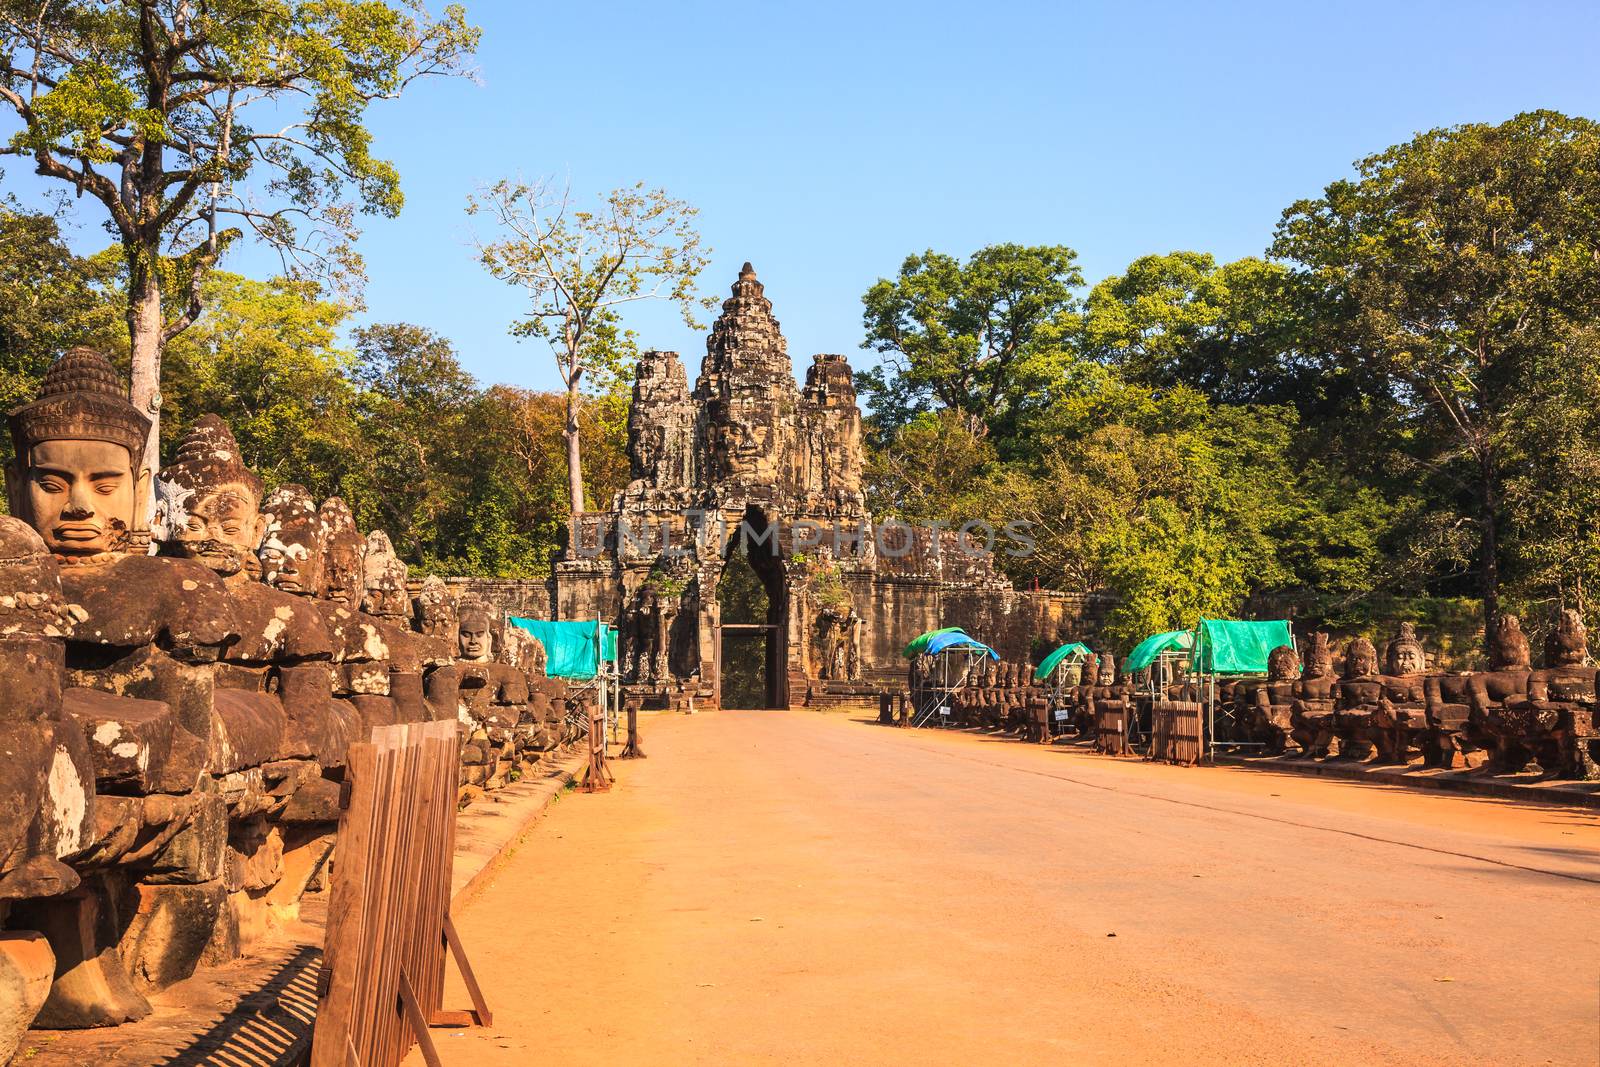 Gate of angkor thom in cambodia